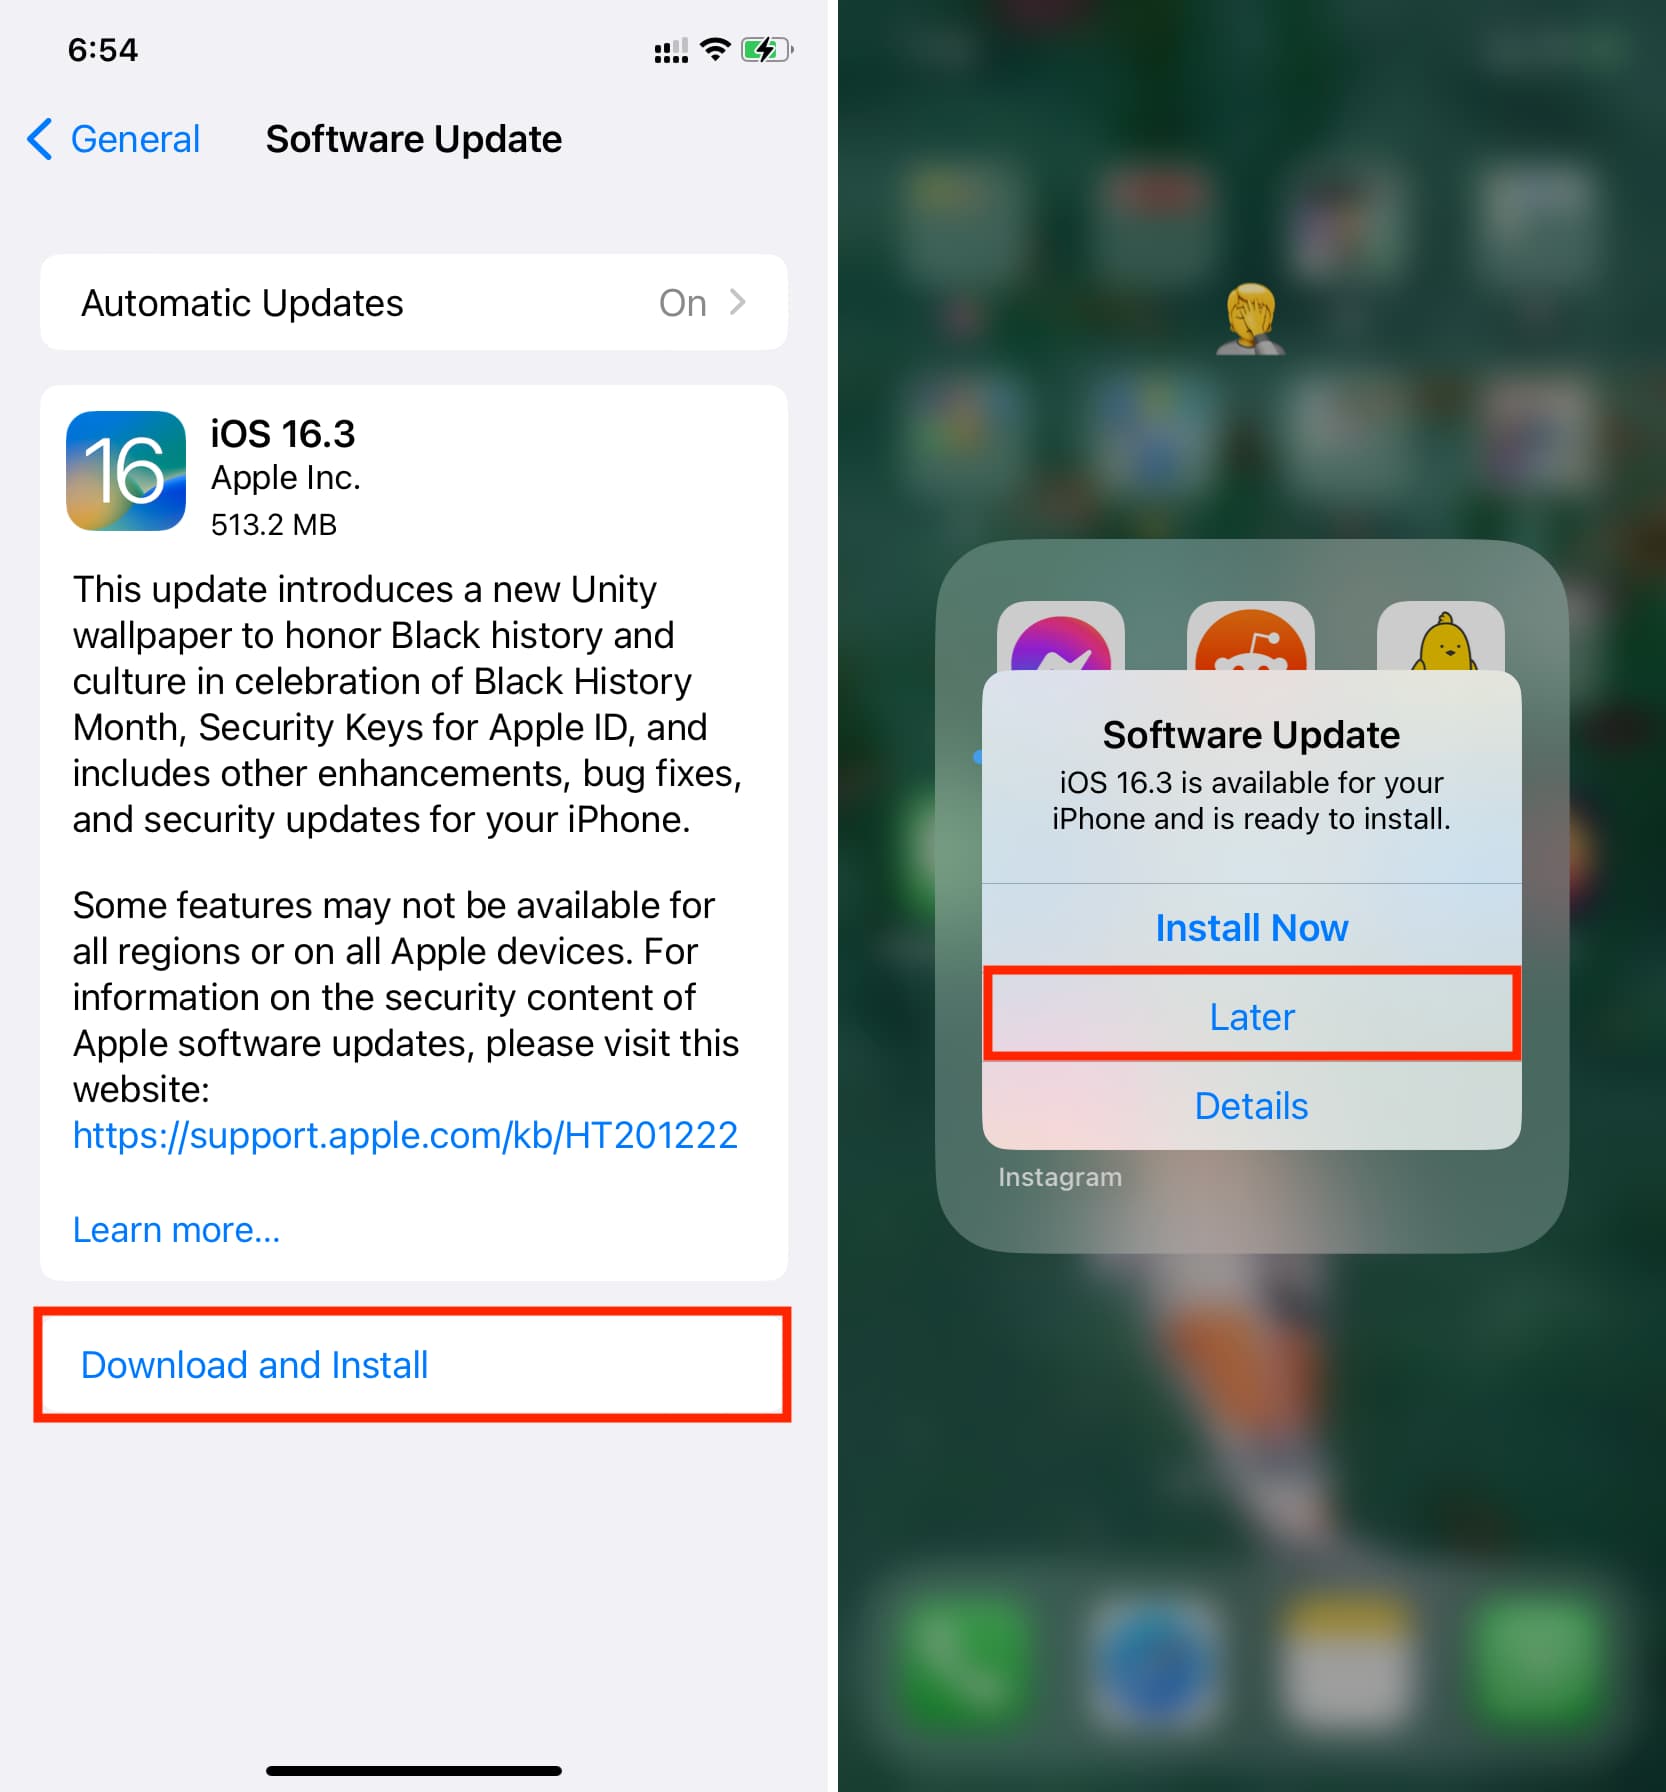 Download and install iOS update later at night